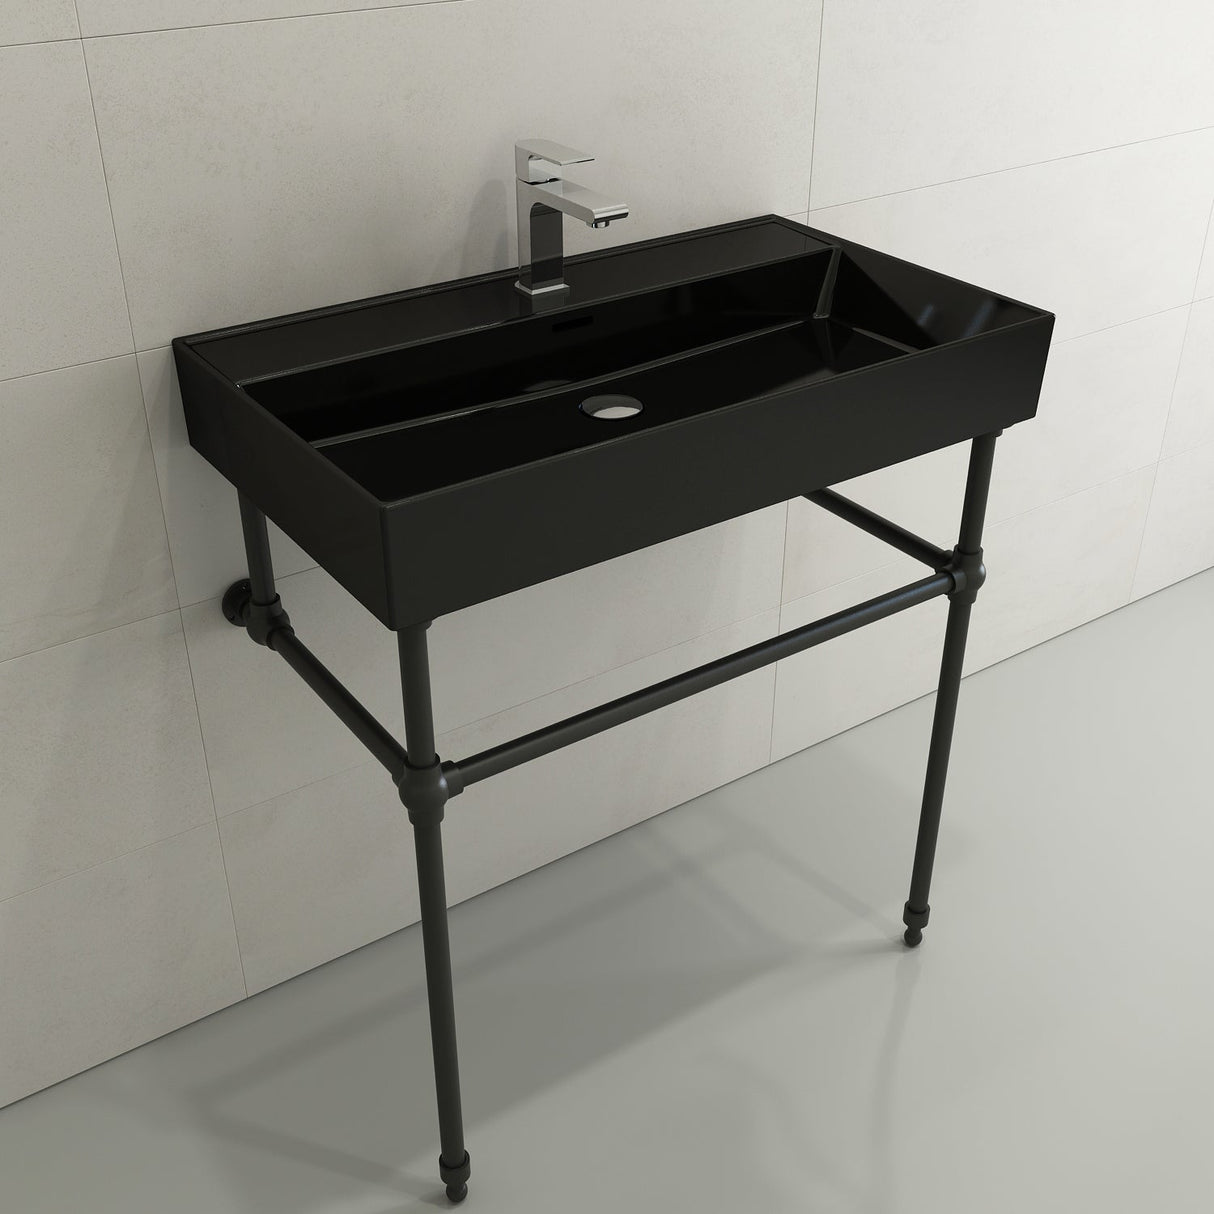 BOCCHI 1377-005-0126 Milano Wall-Mounted Sink Fireclay 32 in. 1-Hole with Overflow in Black